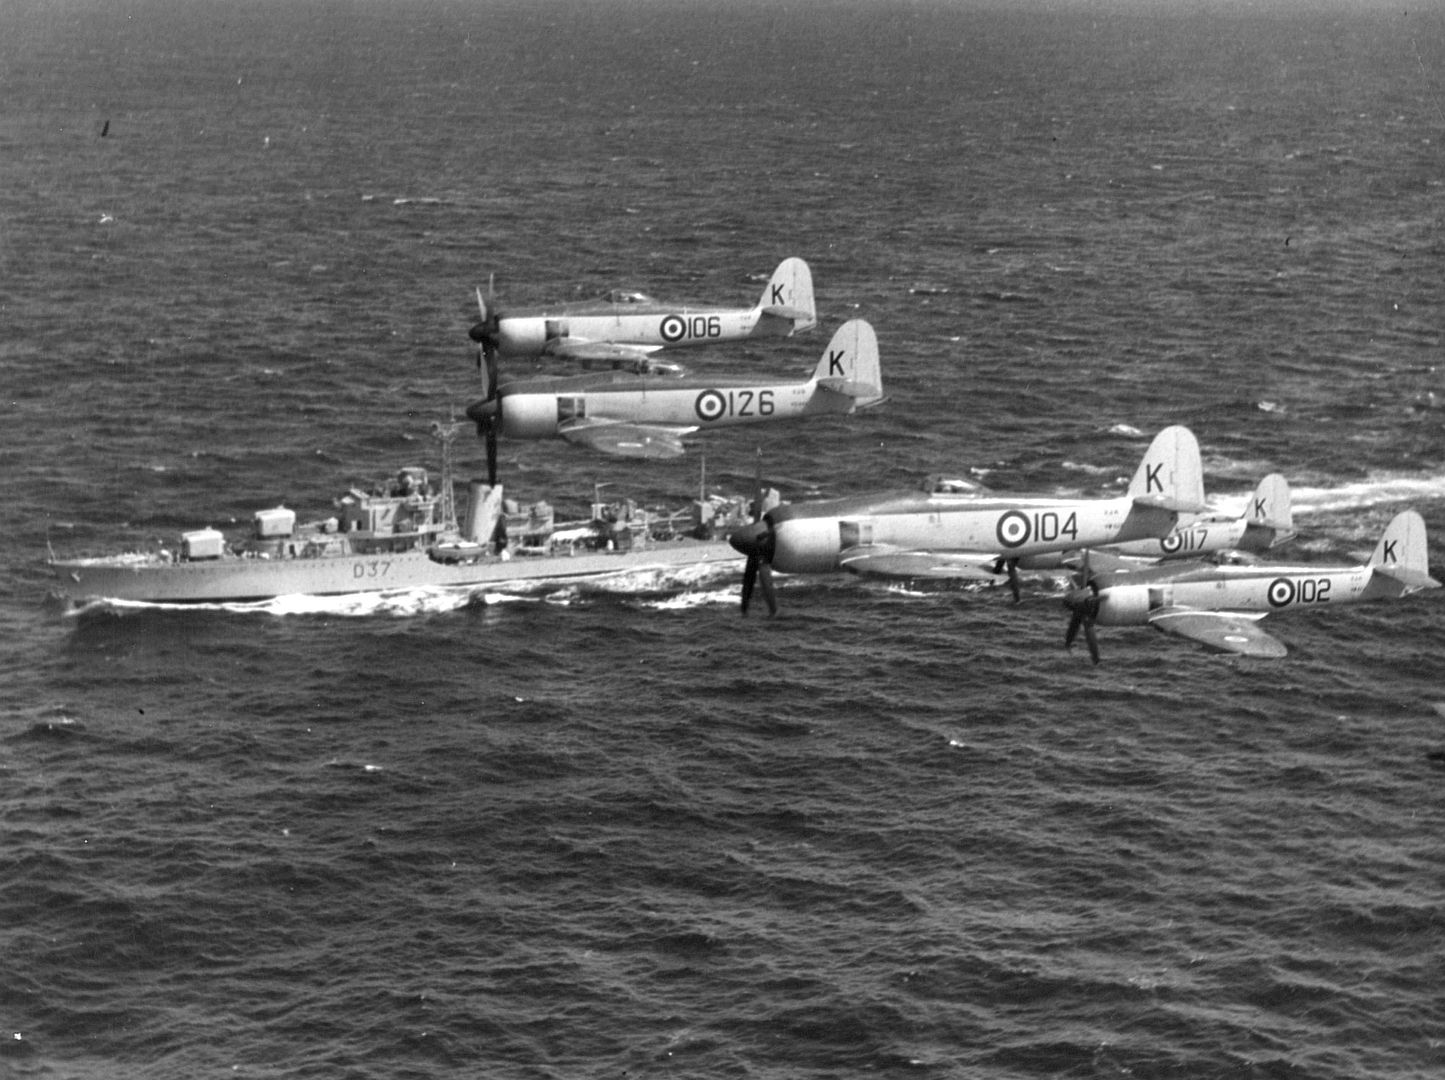 Hawker Sea Fury Aeroplanes Flying In Formation Over A Warship